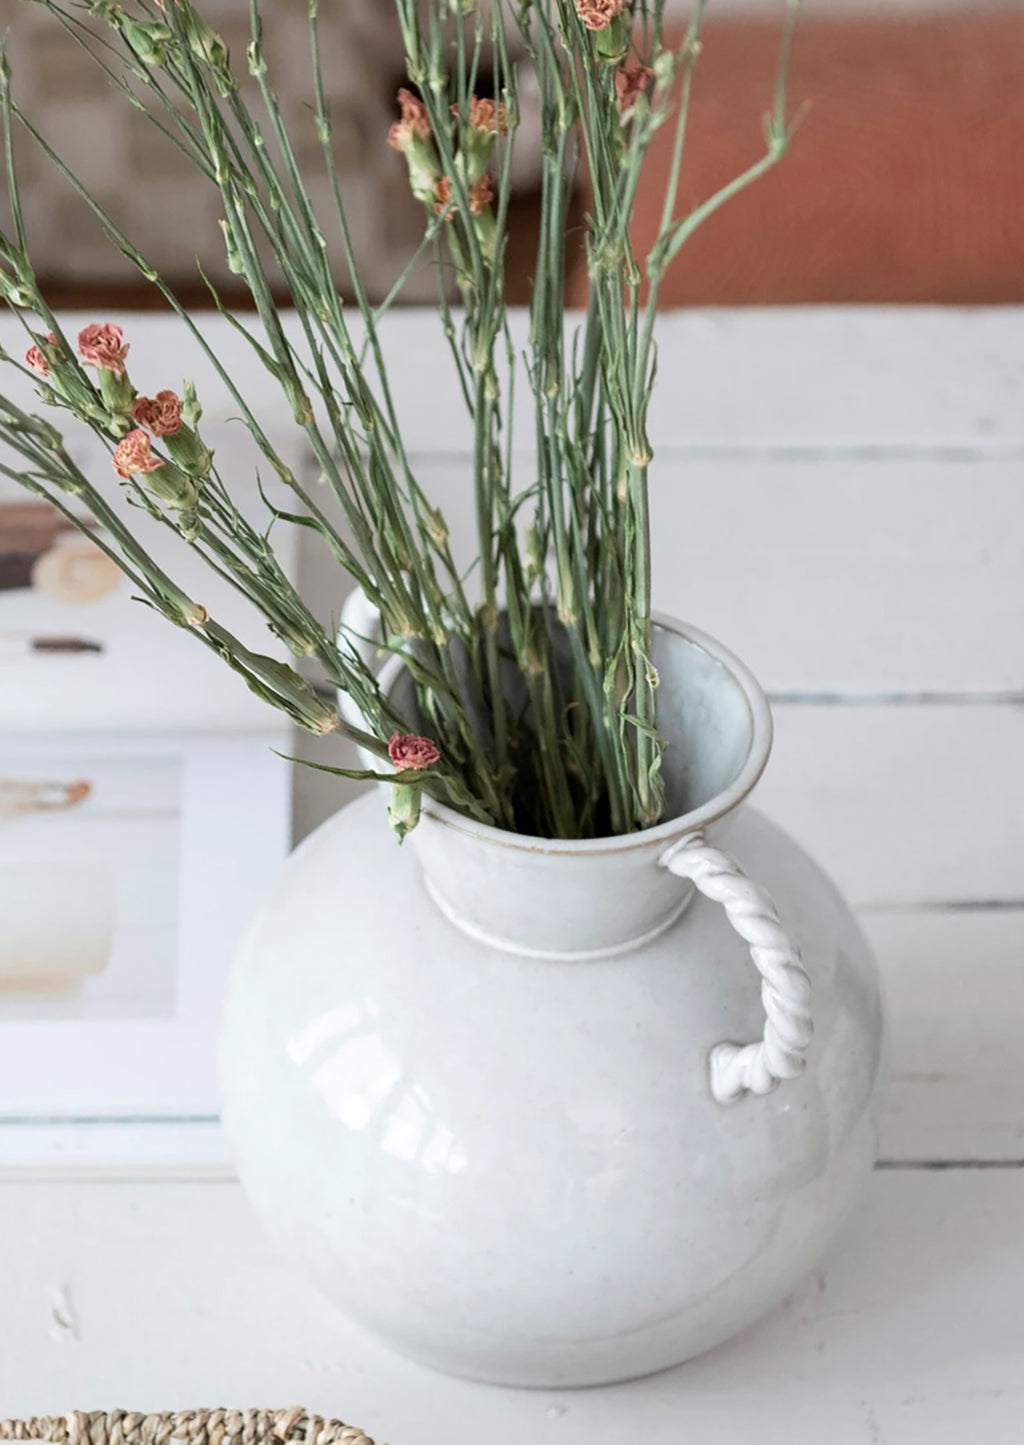 1: A white ceramic vase in situ with carnations.